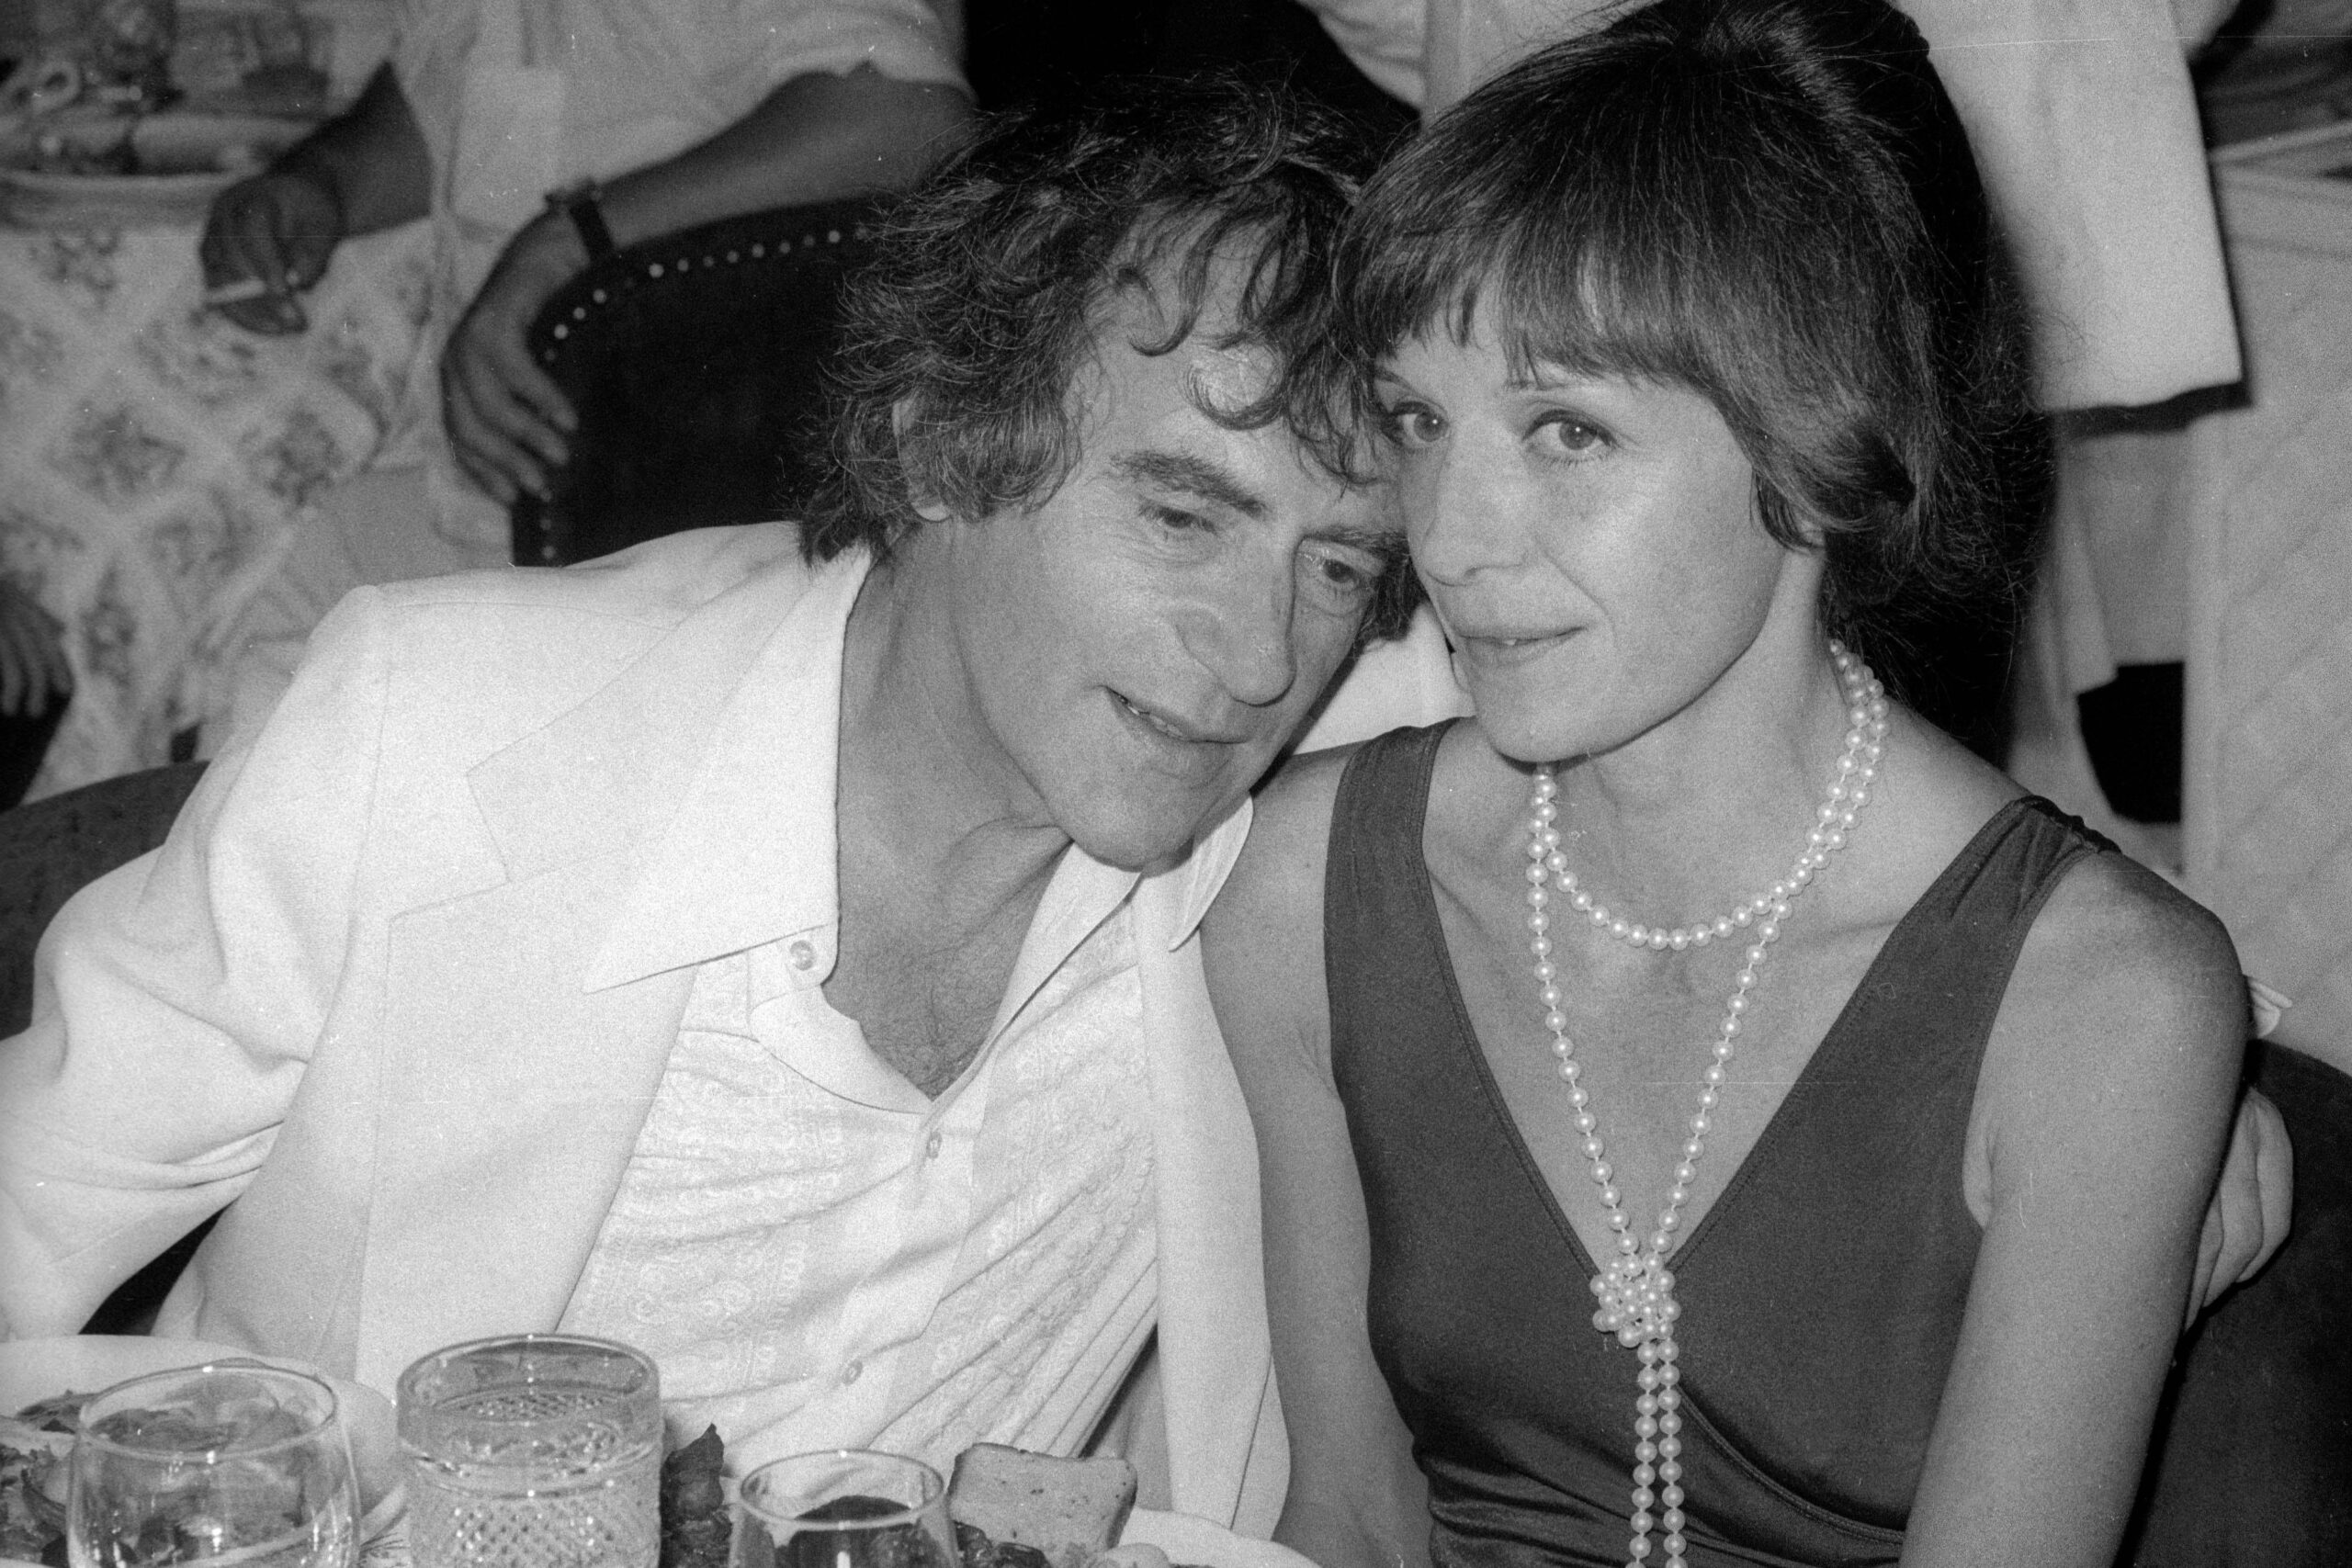 Joe and Gail in 1978 (Photo: Adam Scully/PHOTOlink/MediaPunch)